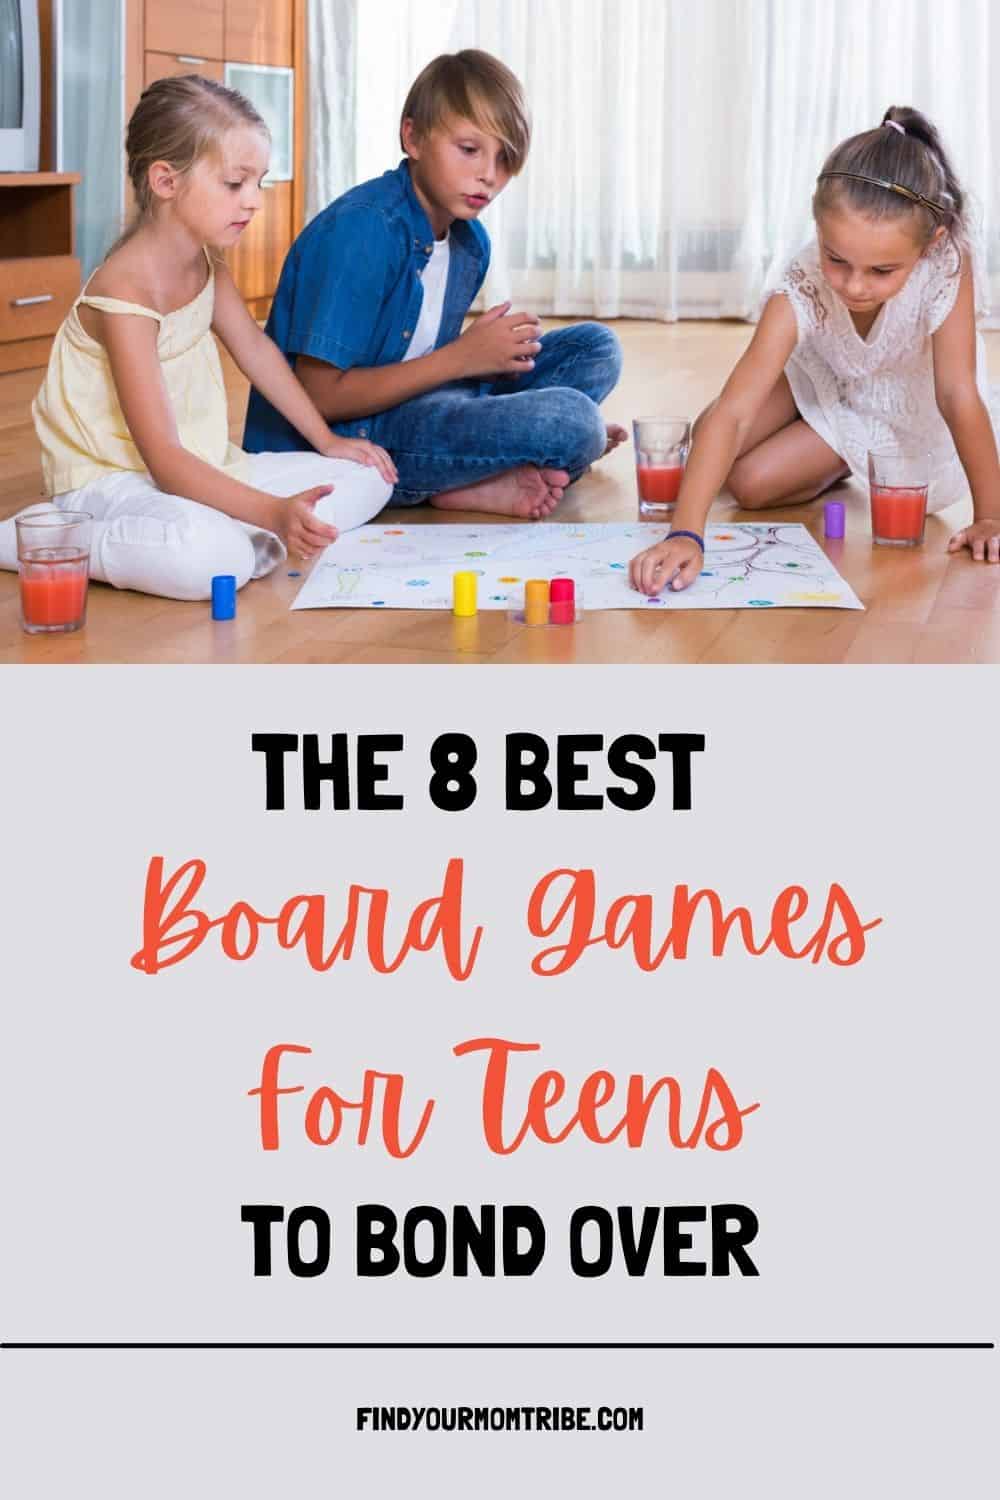 Pinterest board games for teens 